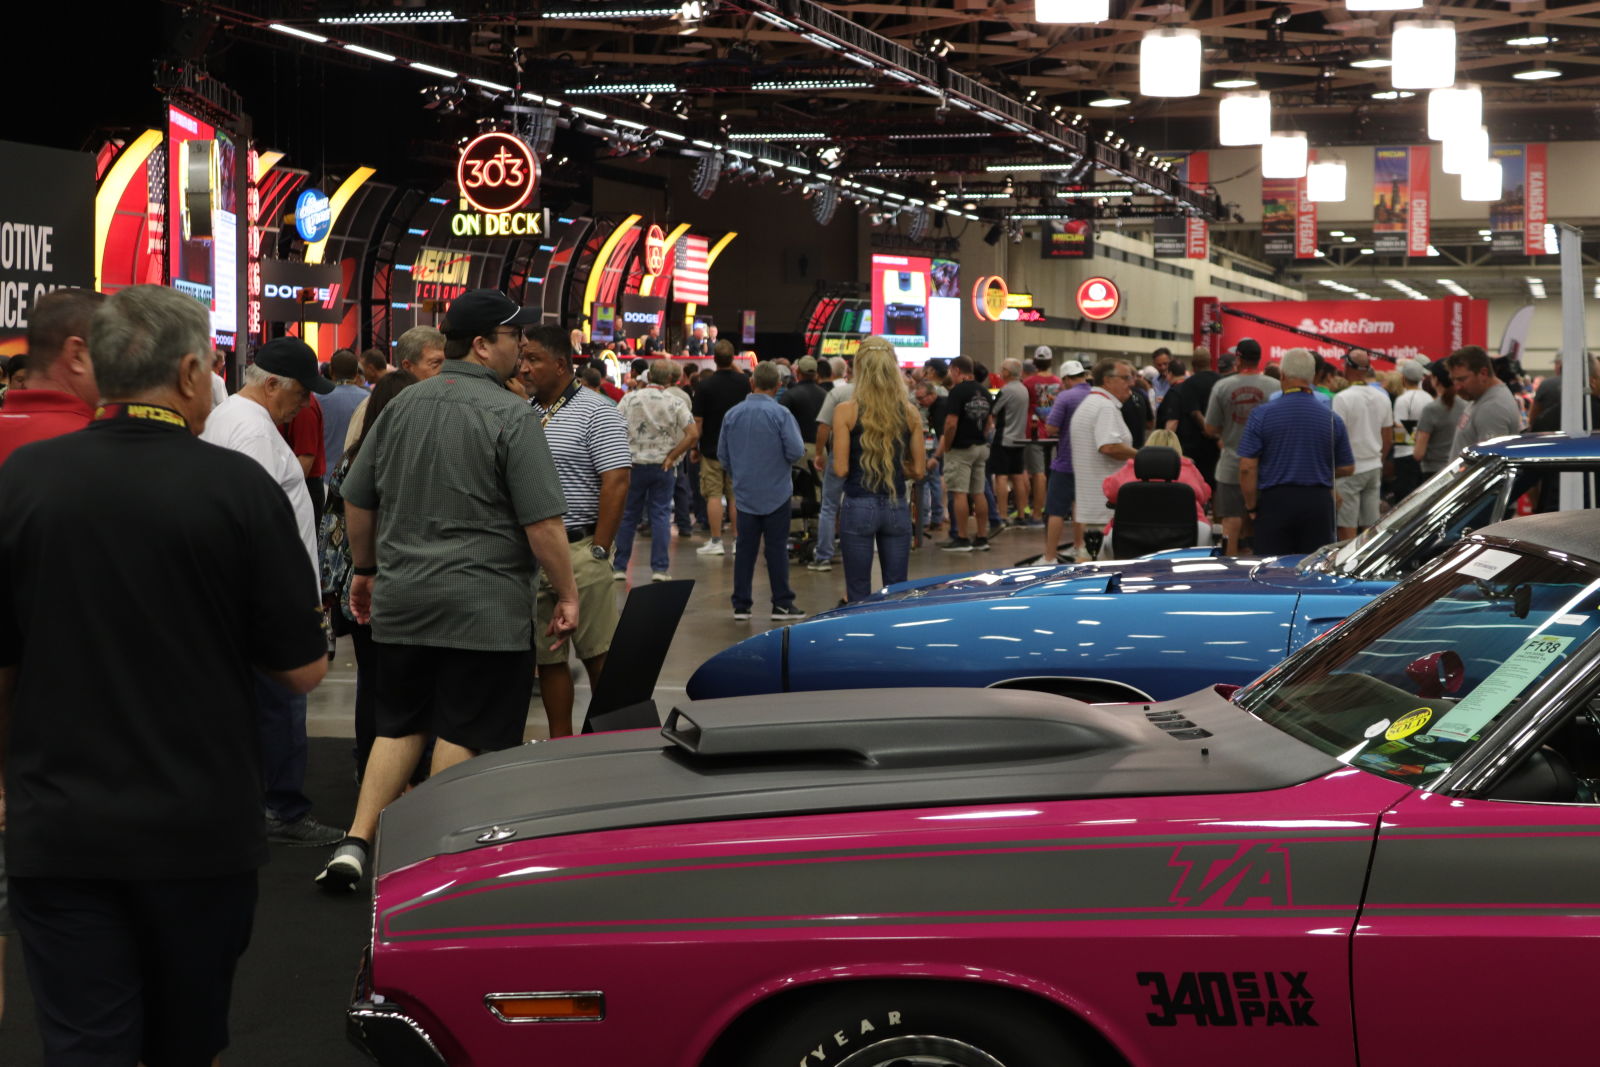 Illustration for article titled Mecum Dallas 2019 Has Something For Everyone